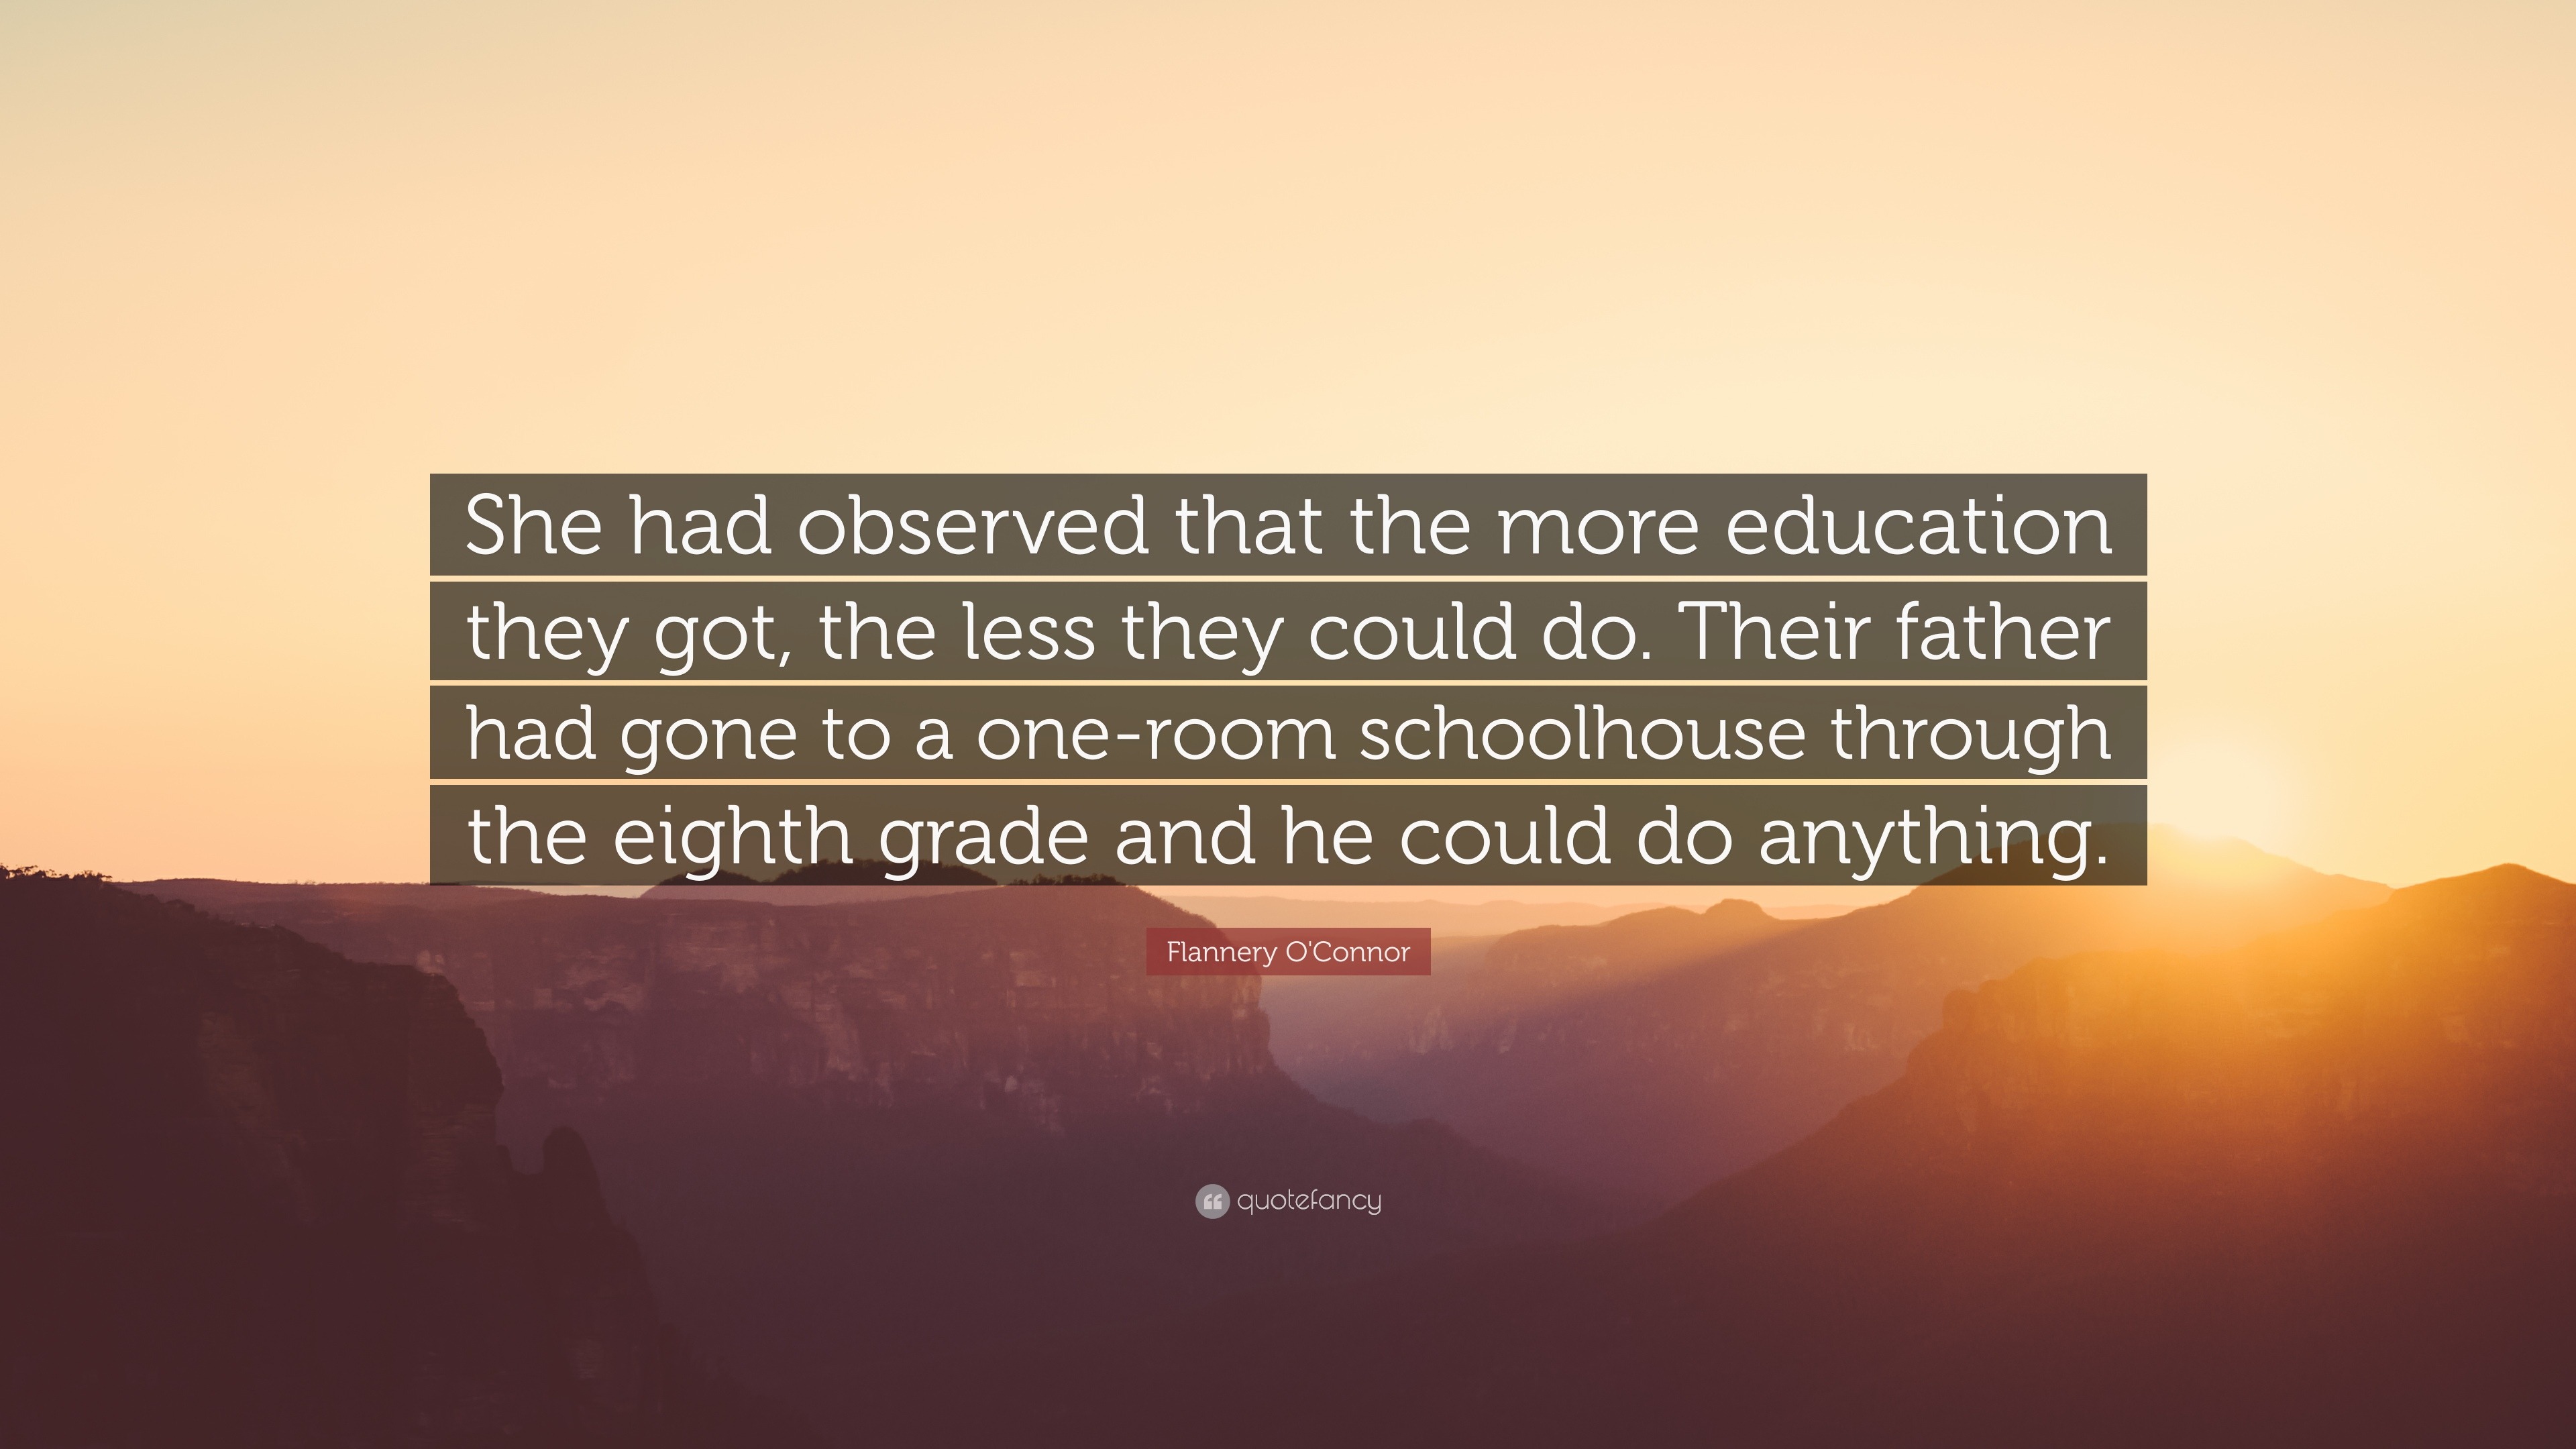 Flannery O'Connor Quote: "She had observed that the more ...